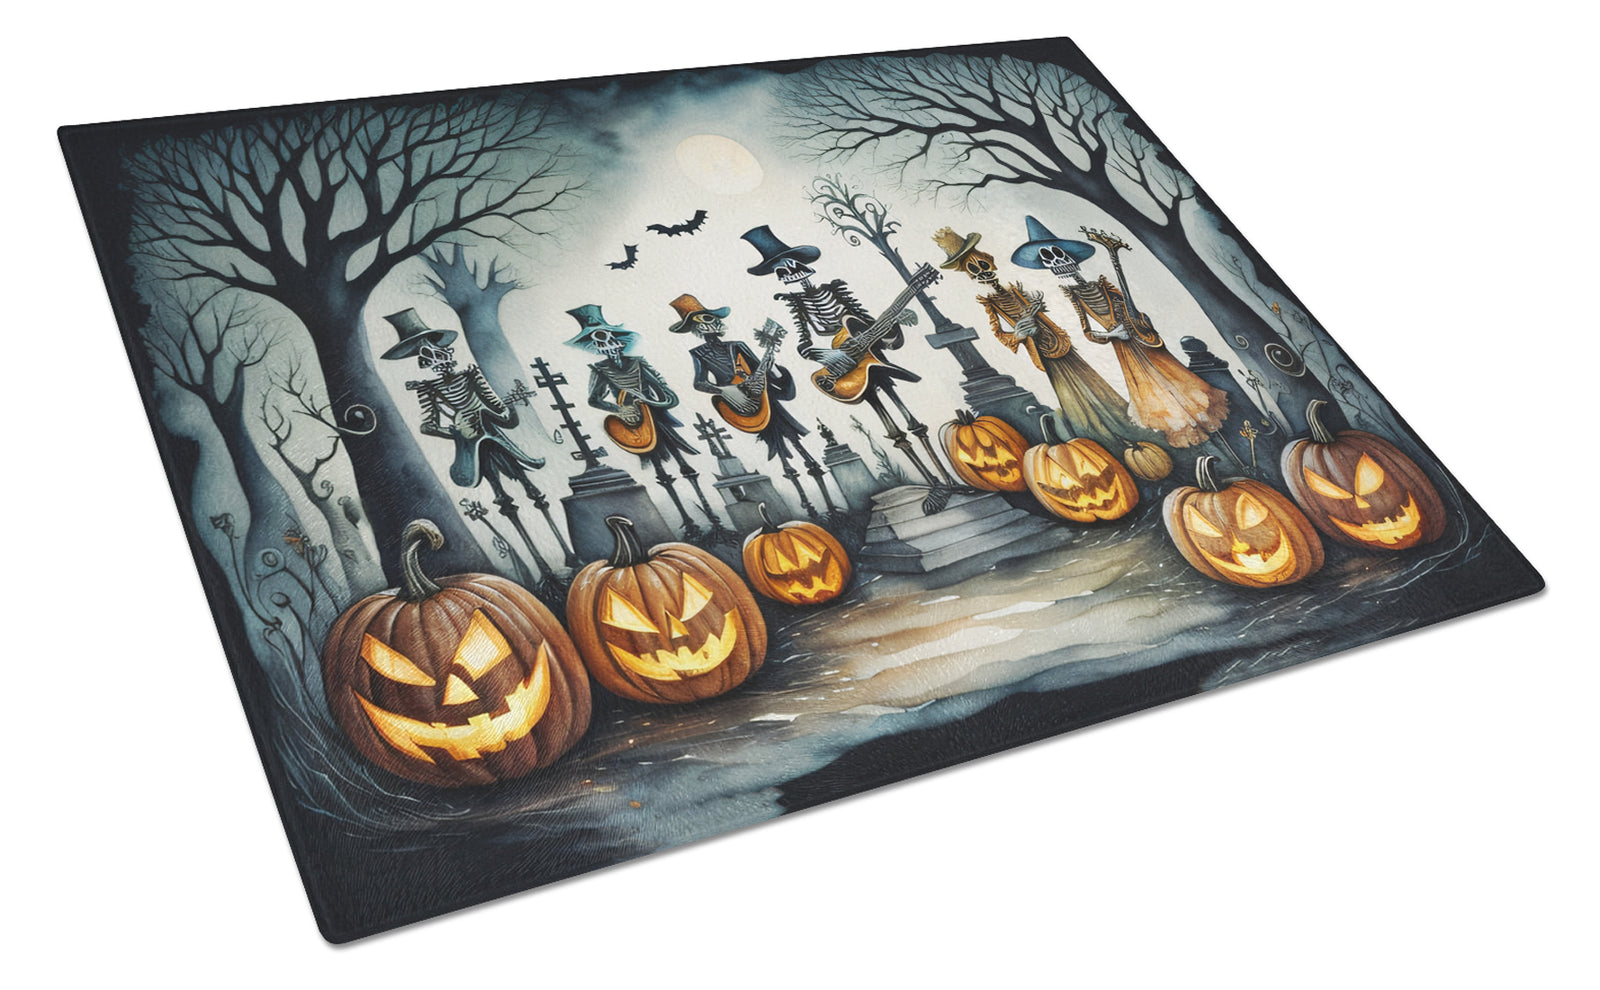 Buy this Mariachi Skeleton Band Spooky Halloween Glass Cutting Board Large